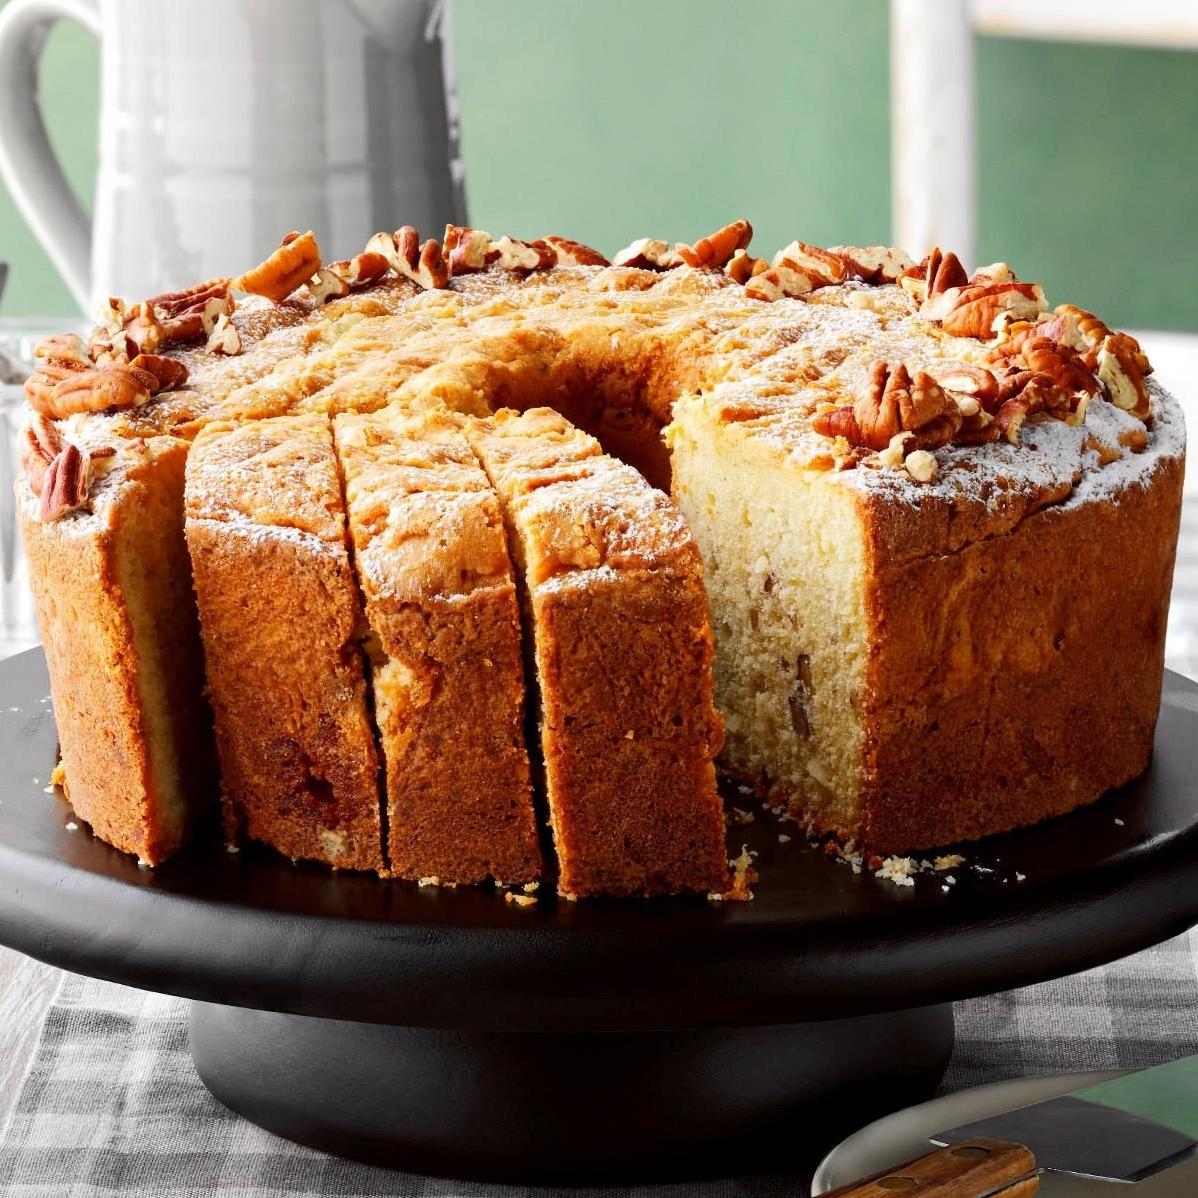  This pecan pound cake is the perfect dessert for any occasion.